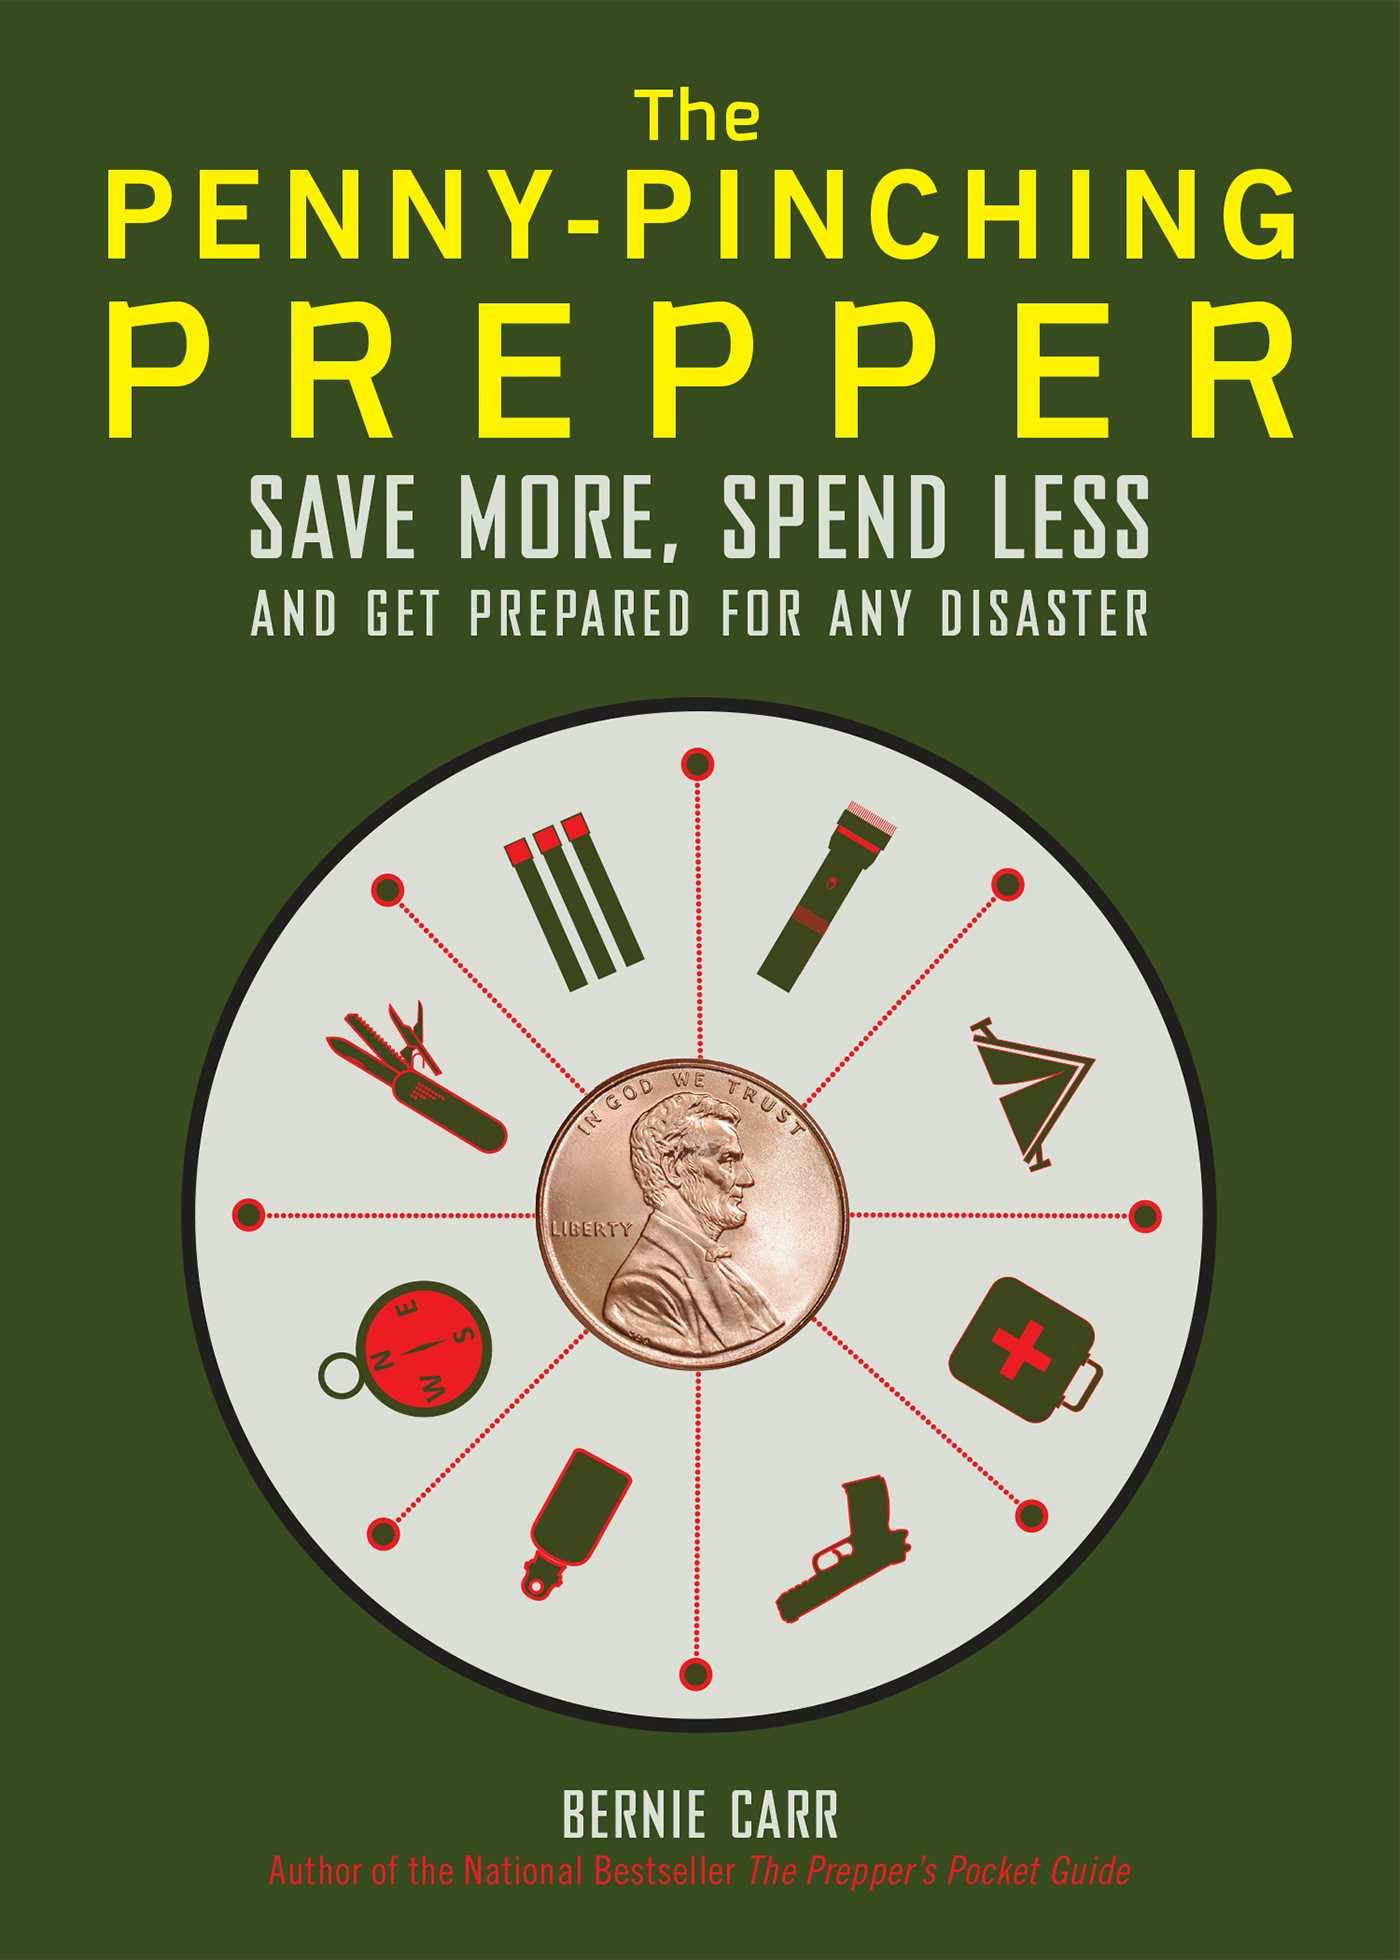 The Penny-Pinching Prepper: Save More, Spend Less and Get Prepared for Any Disaster - Bernie Carr